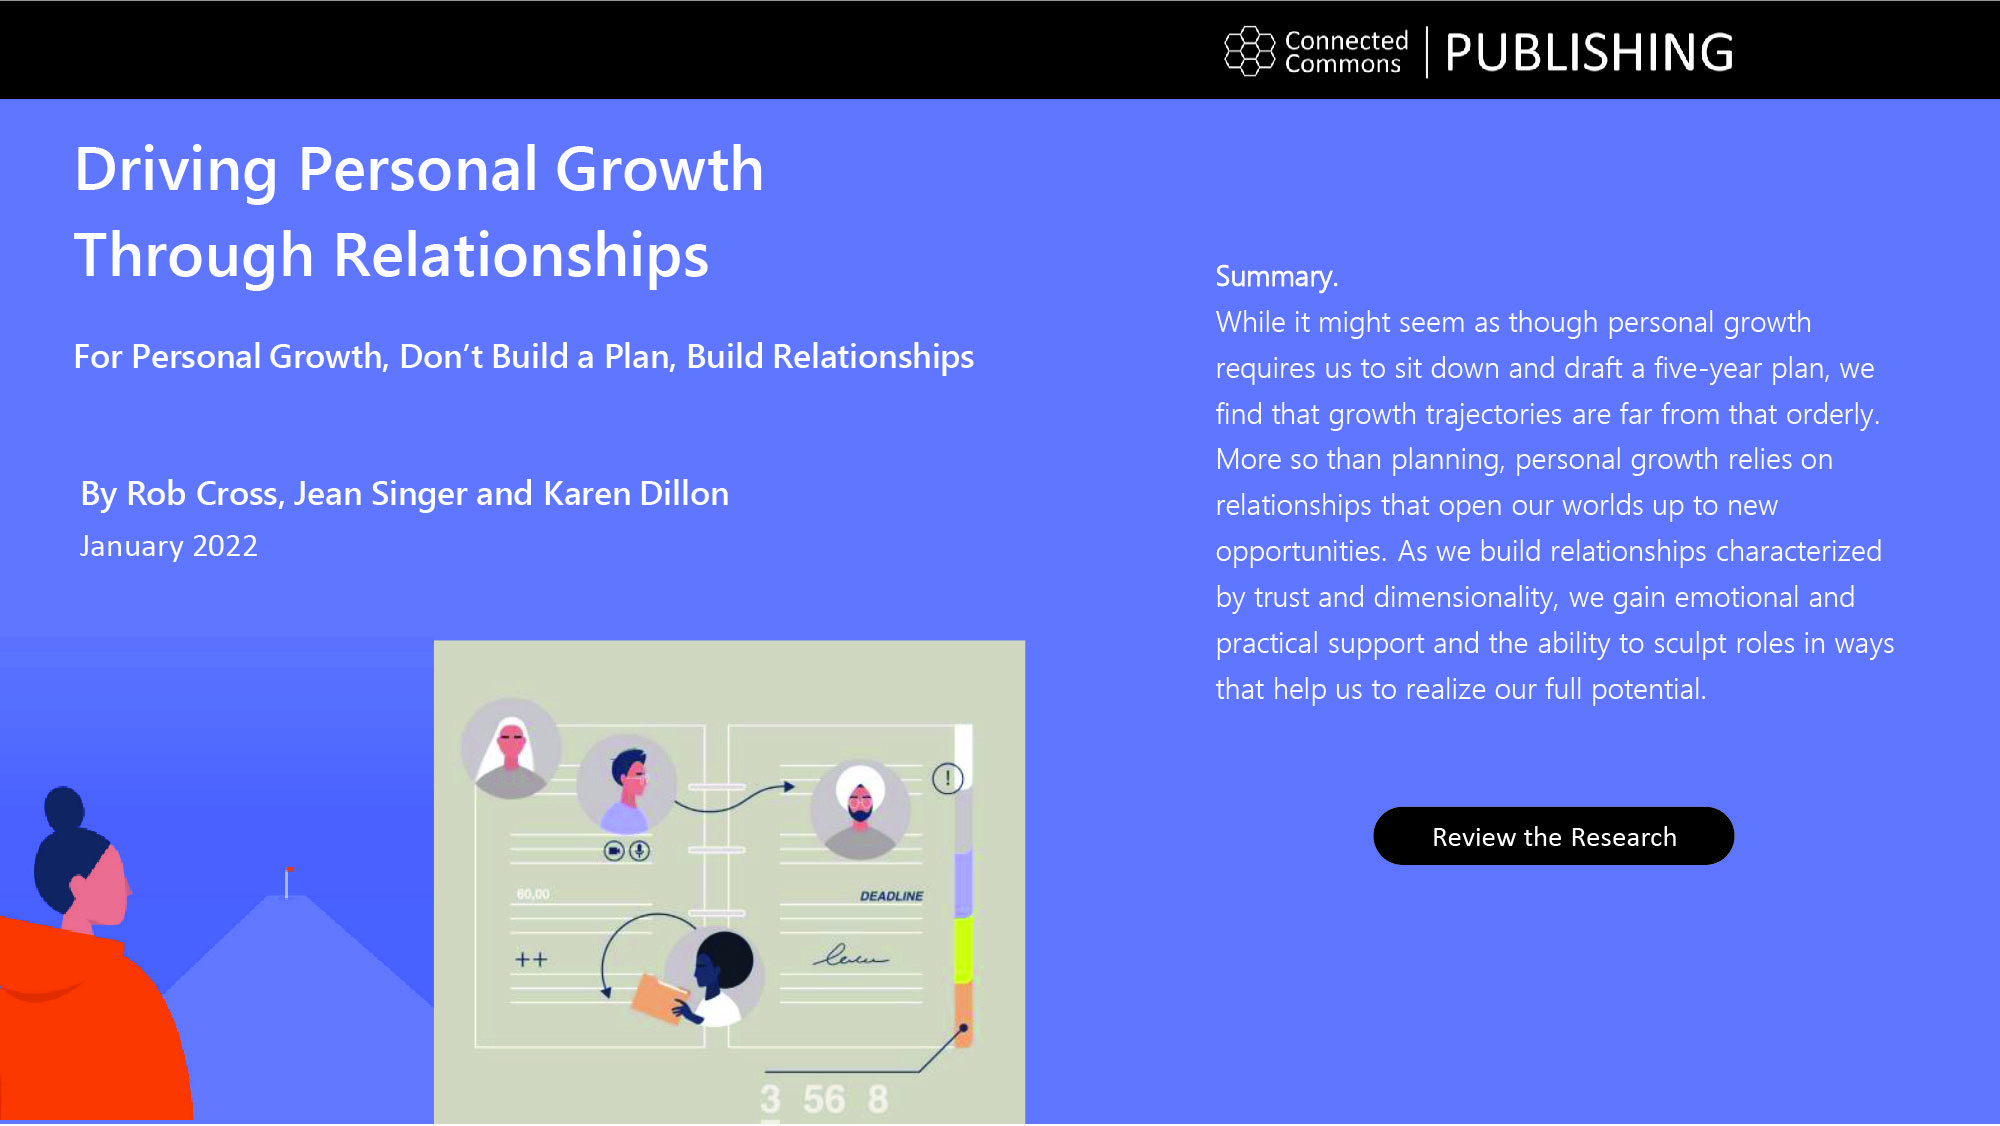 Driving Personal Growth Through Relationships